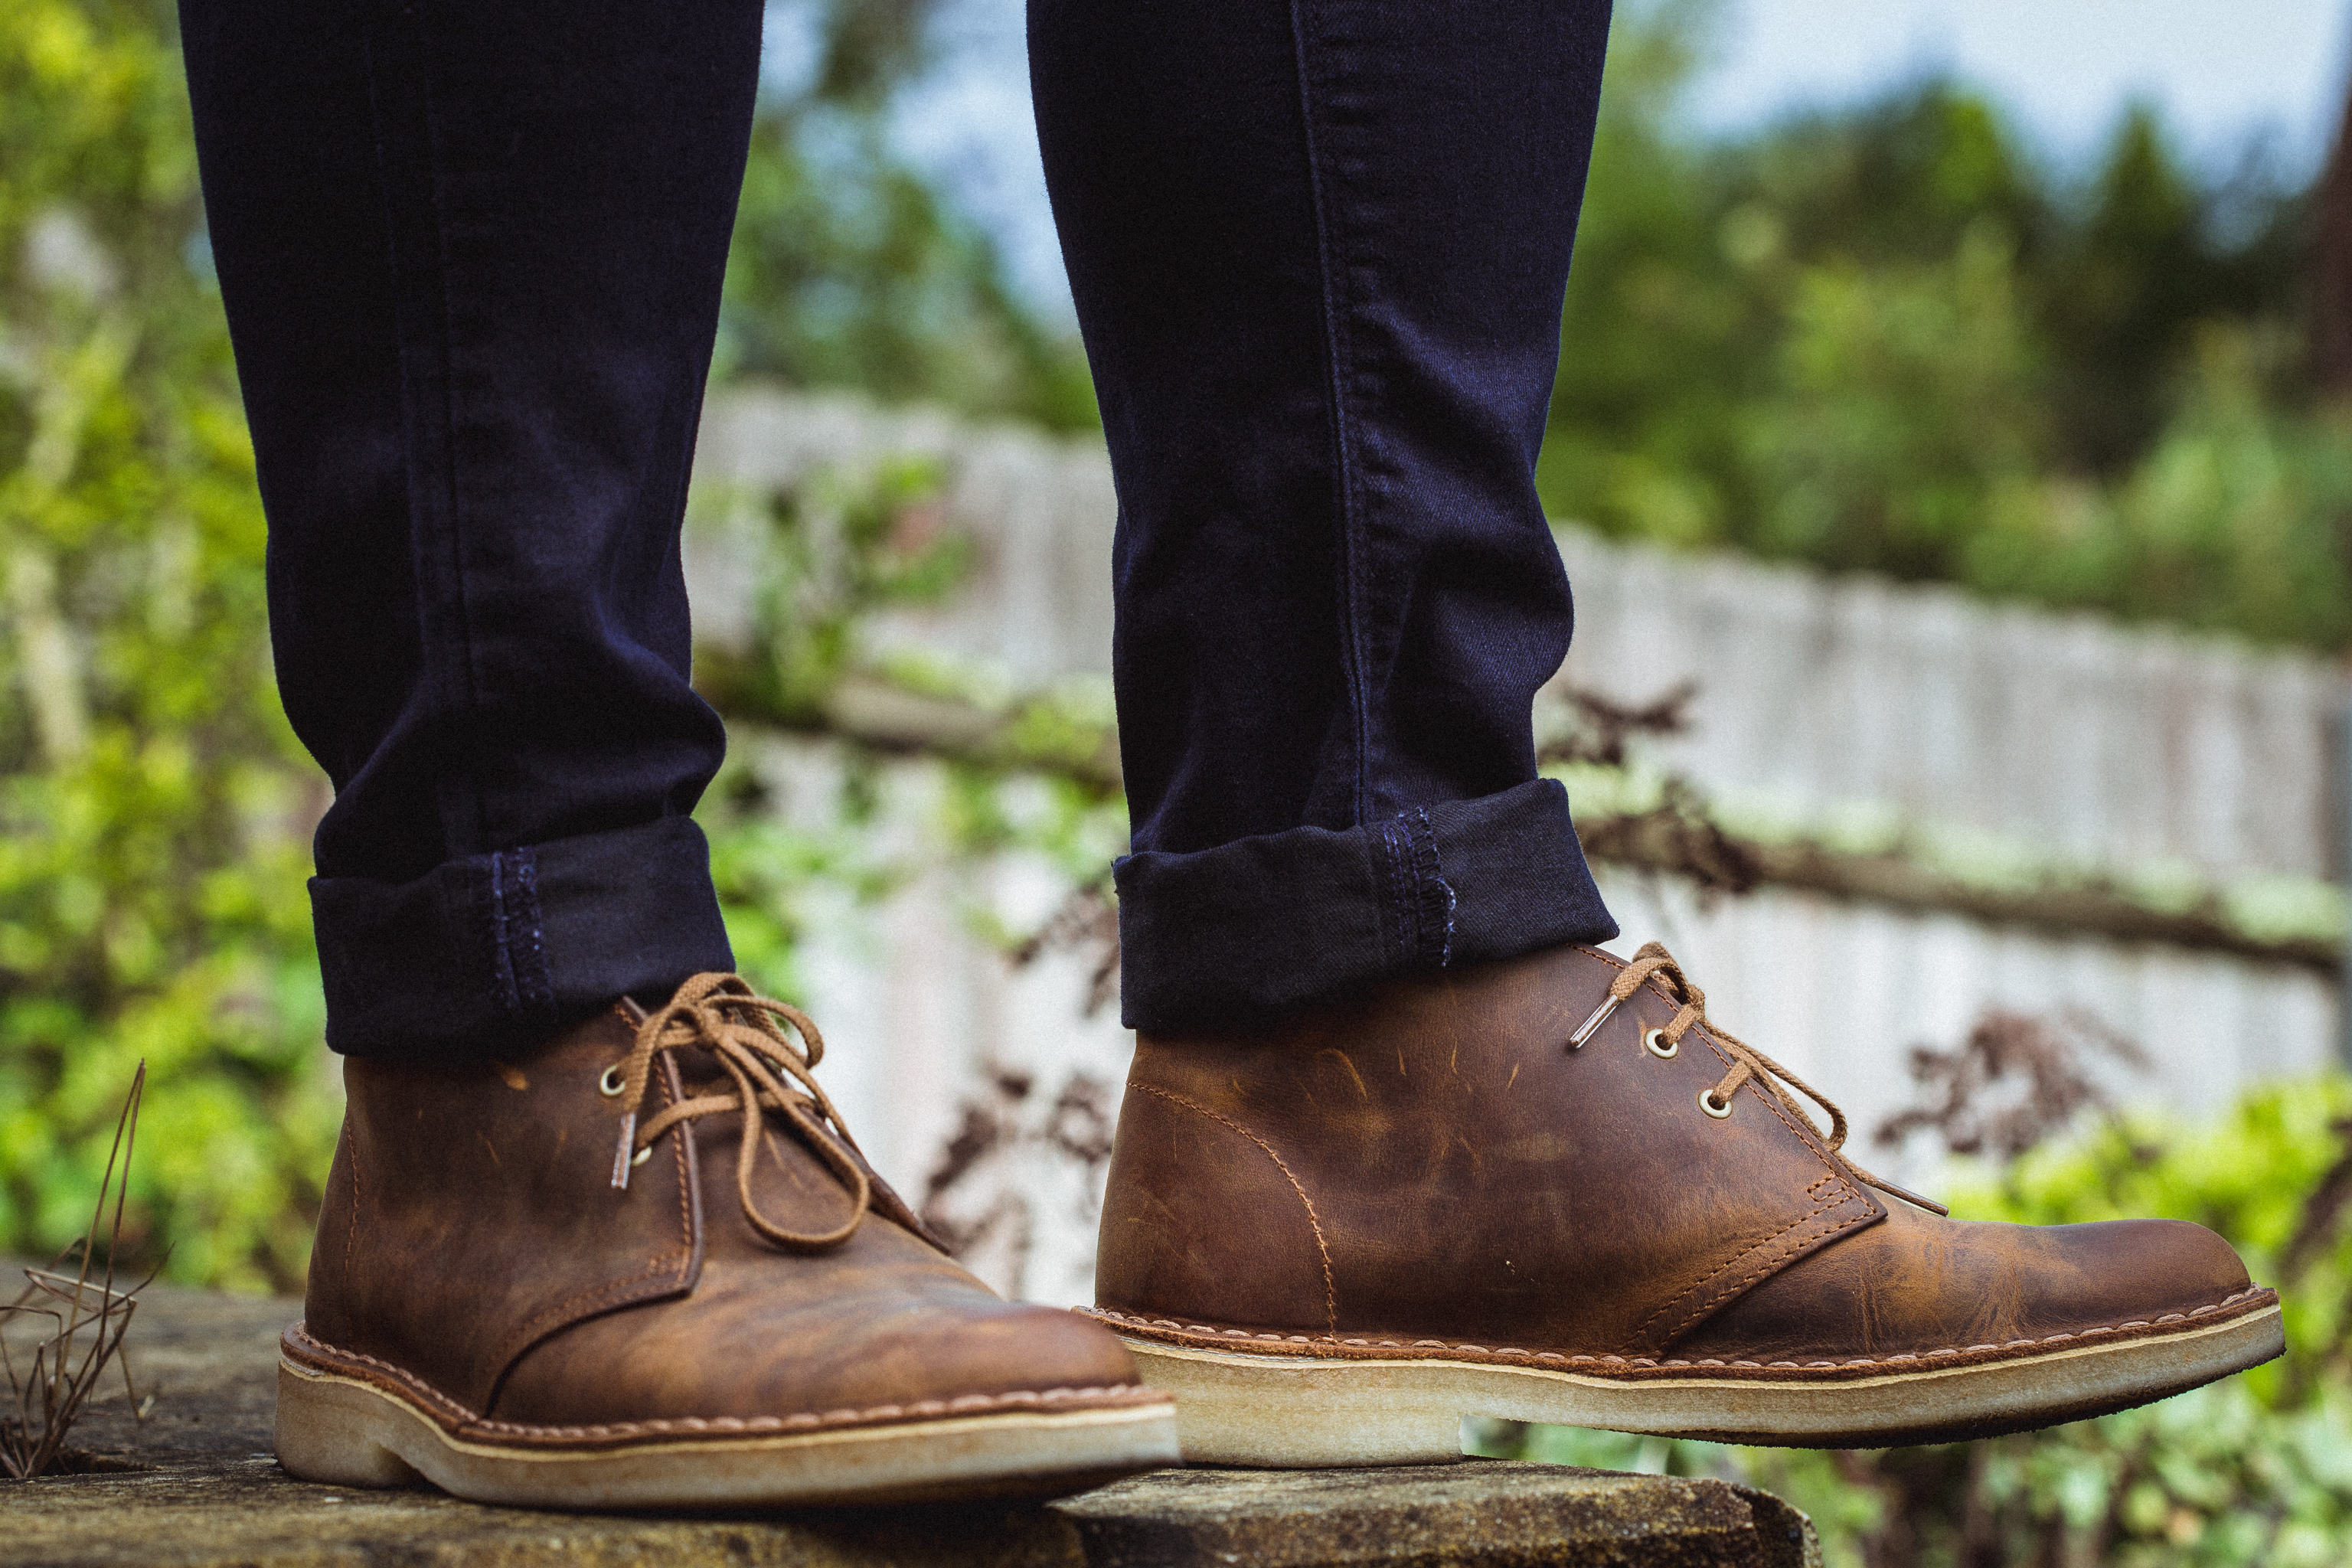 How to Wear Desert Boots with Jeans